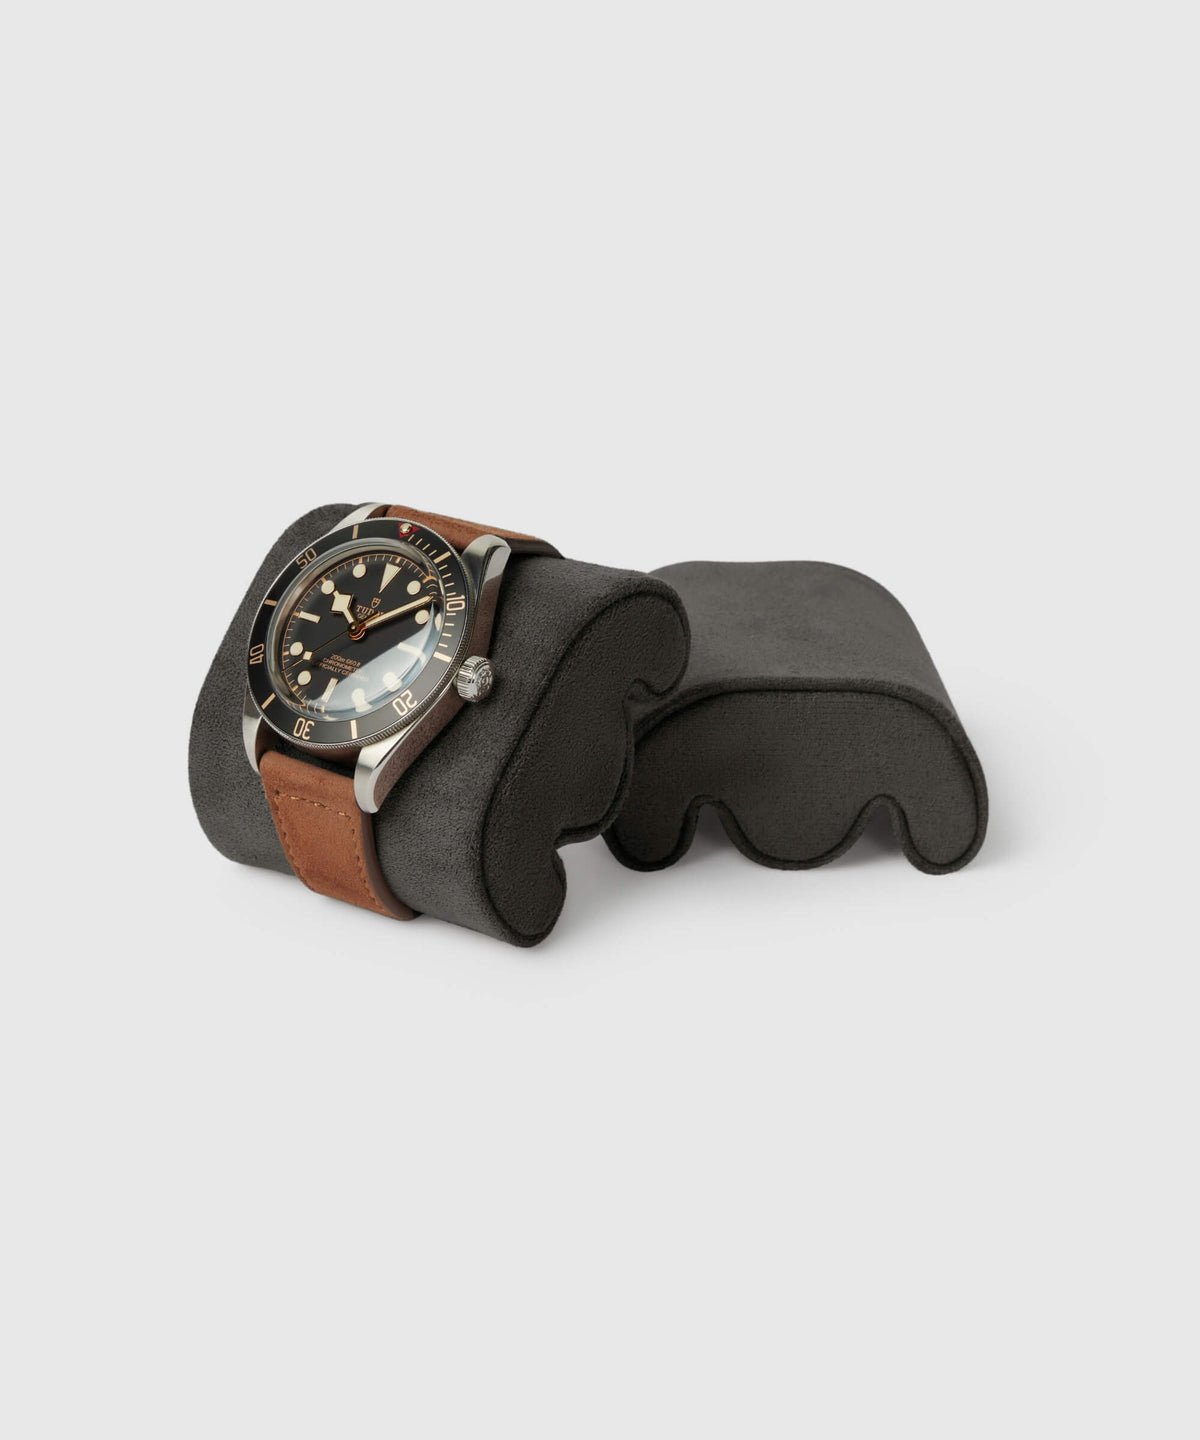 A wristwatch with a brown leather strap and black dial is displayed on a dark grey cushioned holder against a plain background, reminiscent of the luxurious TAWBURY Fraser Replacement Watch Case Pillows - X-Small - Black/Charcoal.